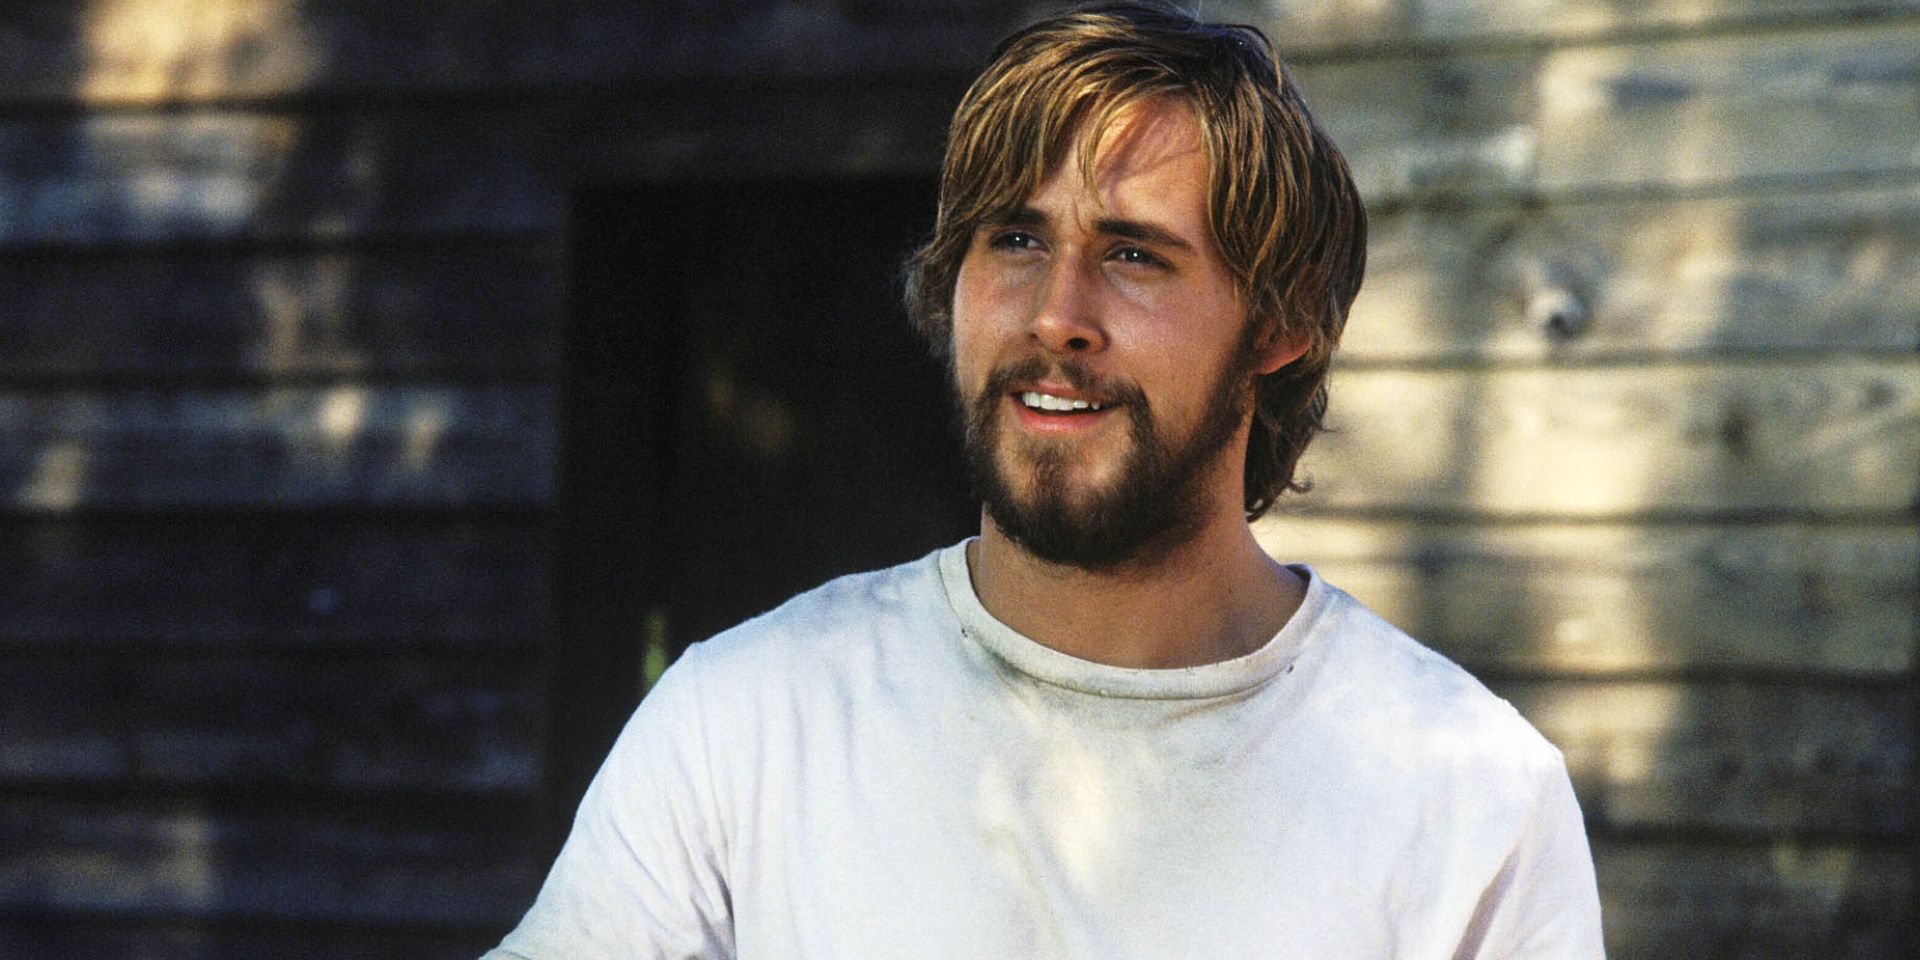 Noah Calhoun (Ryan Gosling) smiling with long hair and a beard in The Notebook.